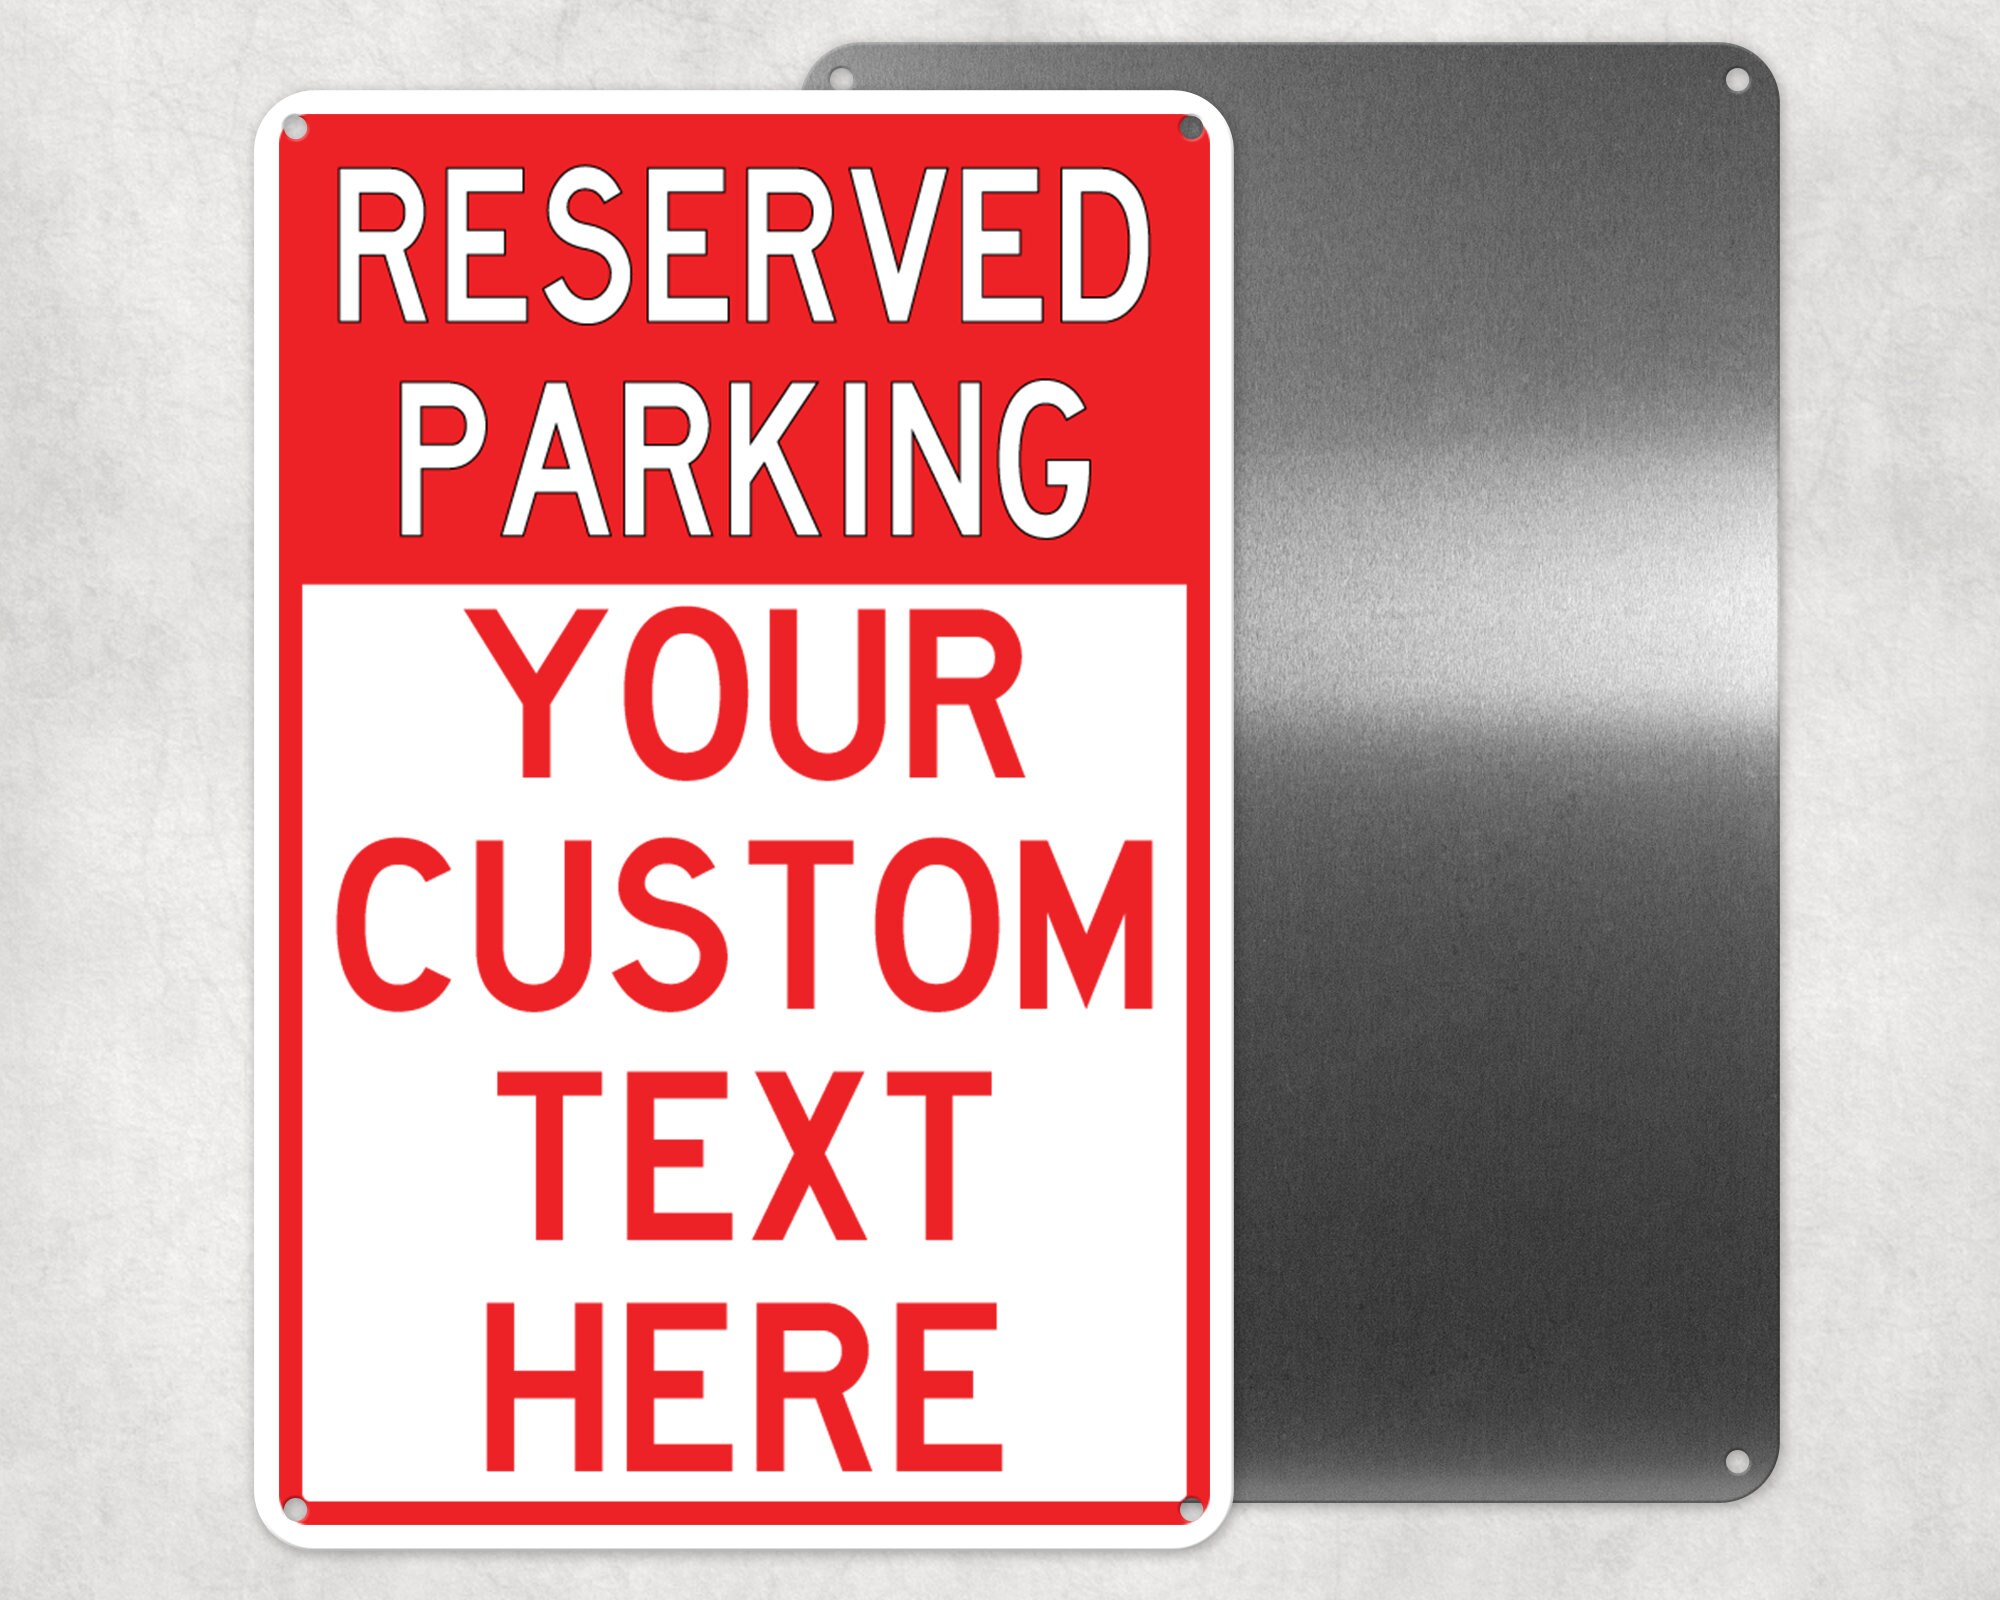 PERSONALIZED RESERVED PARKING SIGN DURABLE ALUMINUM NO RUST CUSTOM TEXT PARKING 